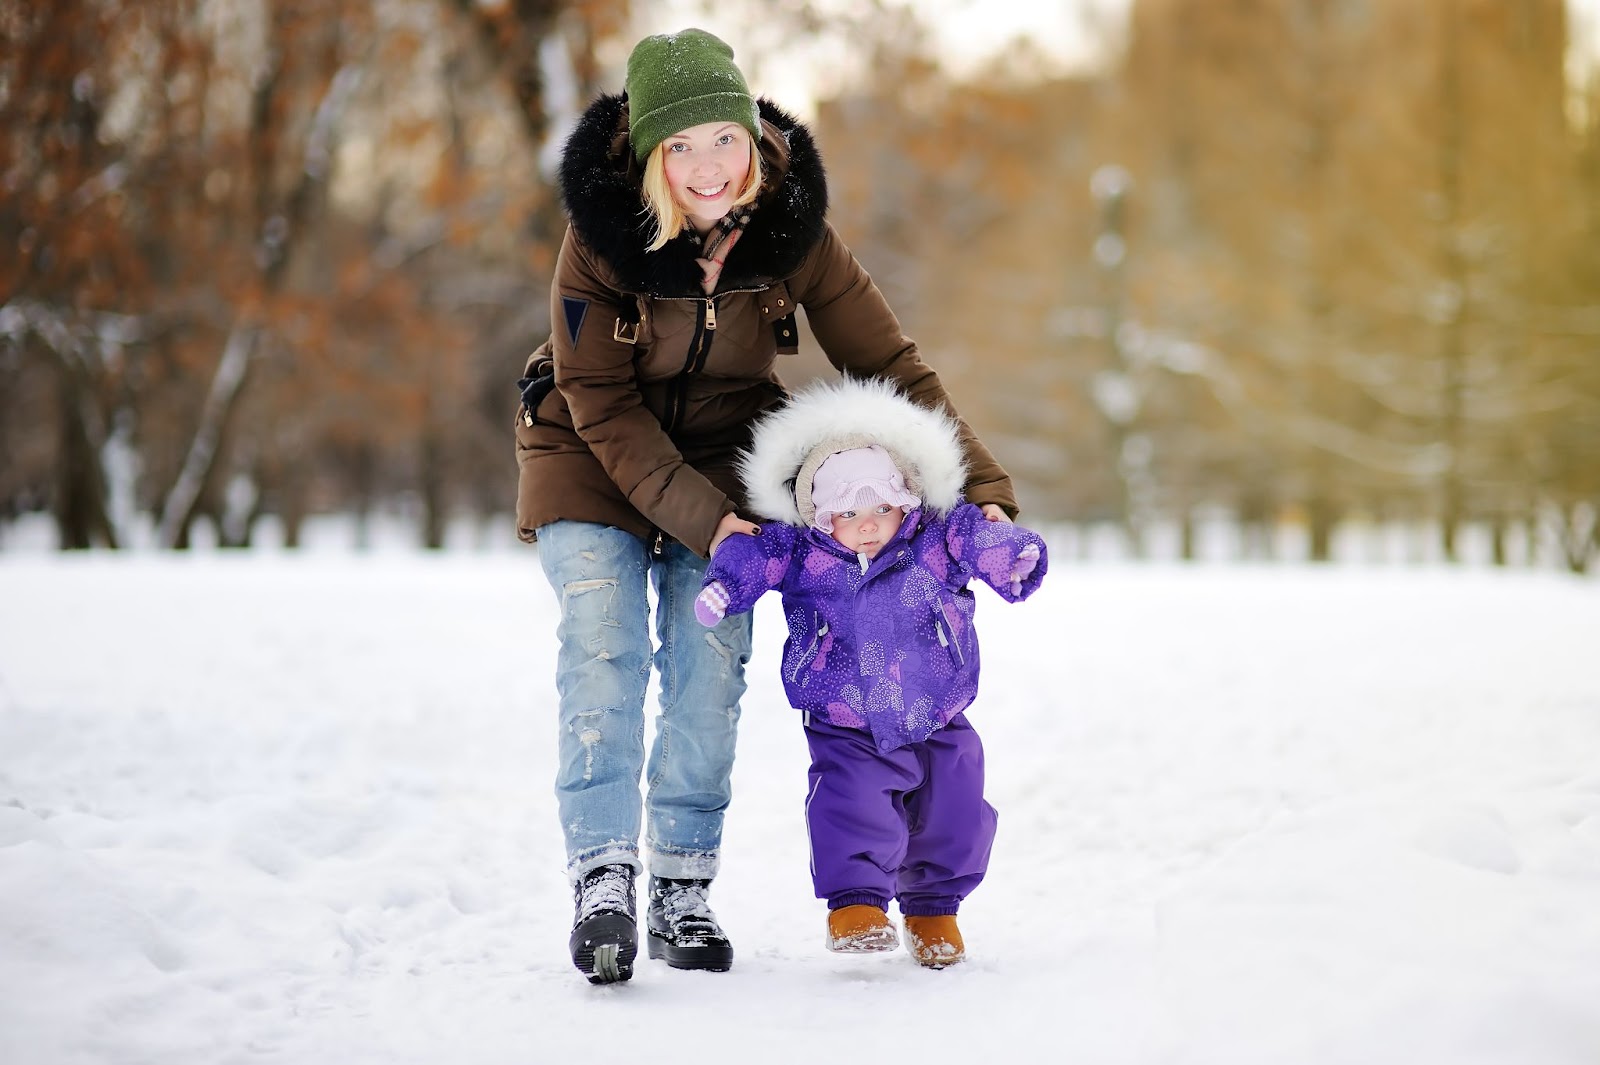 Nanny and child in purple coat walking on snowy ground.